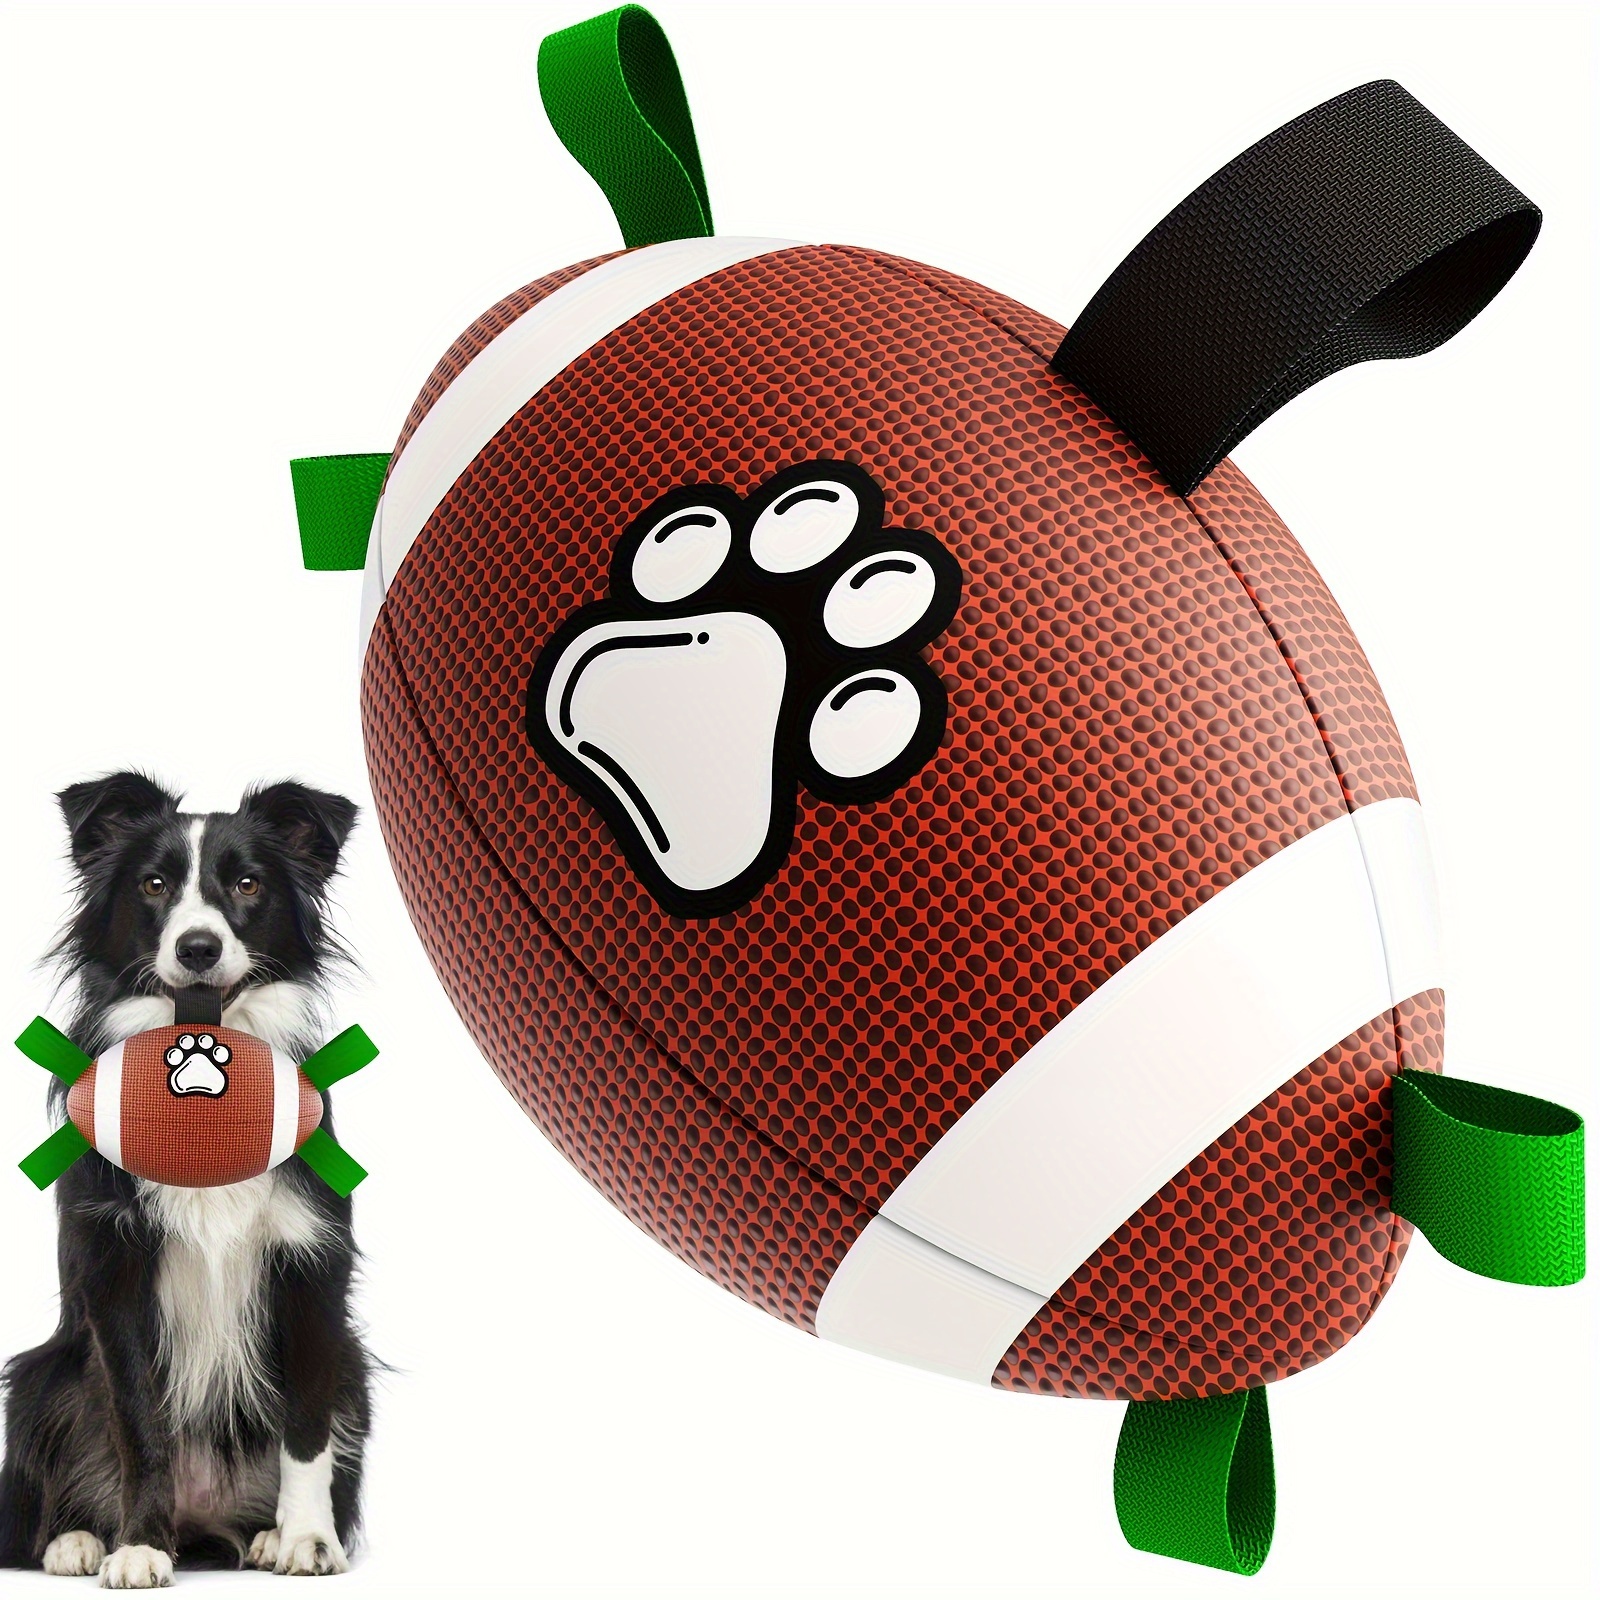 

1pc Durable Rugby Ball Design Pet Toy With Straps, Dog Chewing Ball Toy For Training Playing Teeth Cleaning, Interactive Fetch Pet Toy For Small Medium Large Dogs